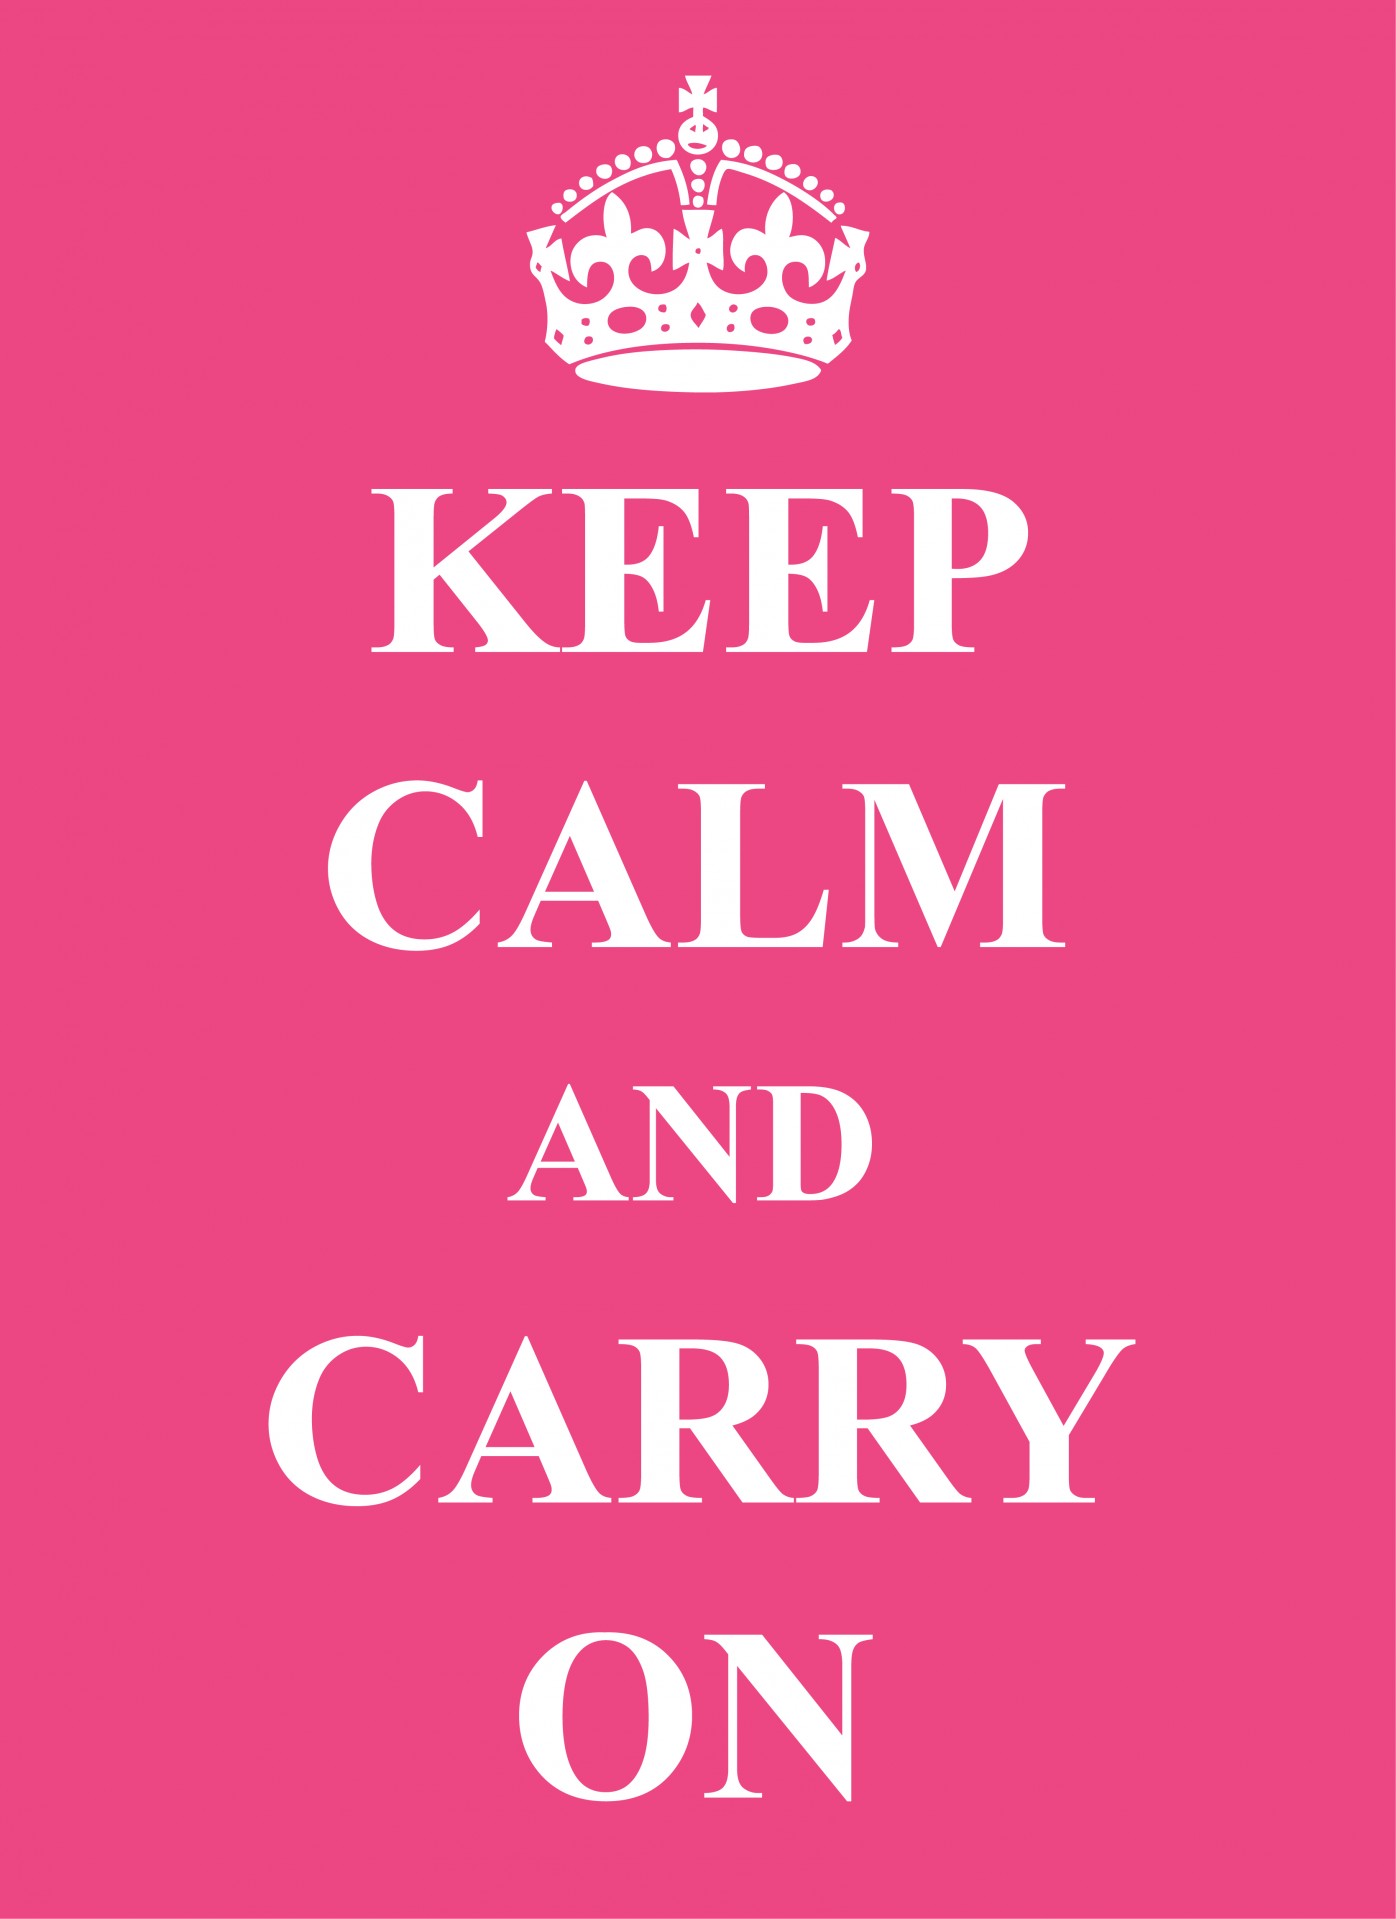 keep calm and carry on pink poster free photo